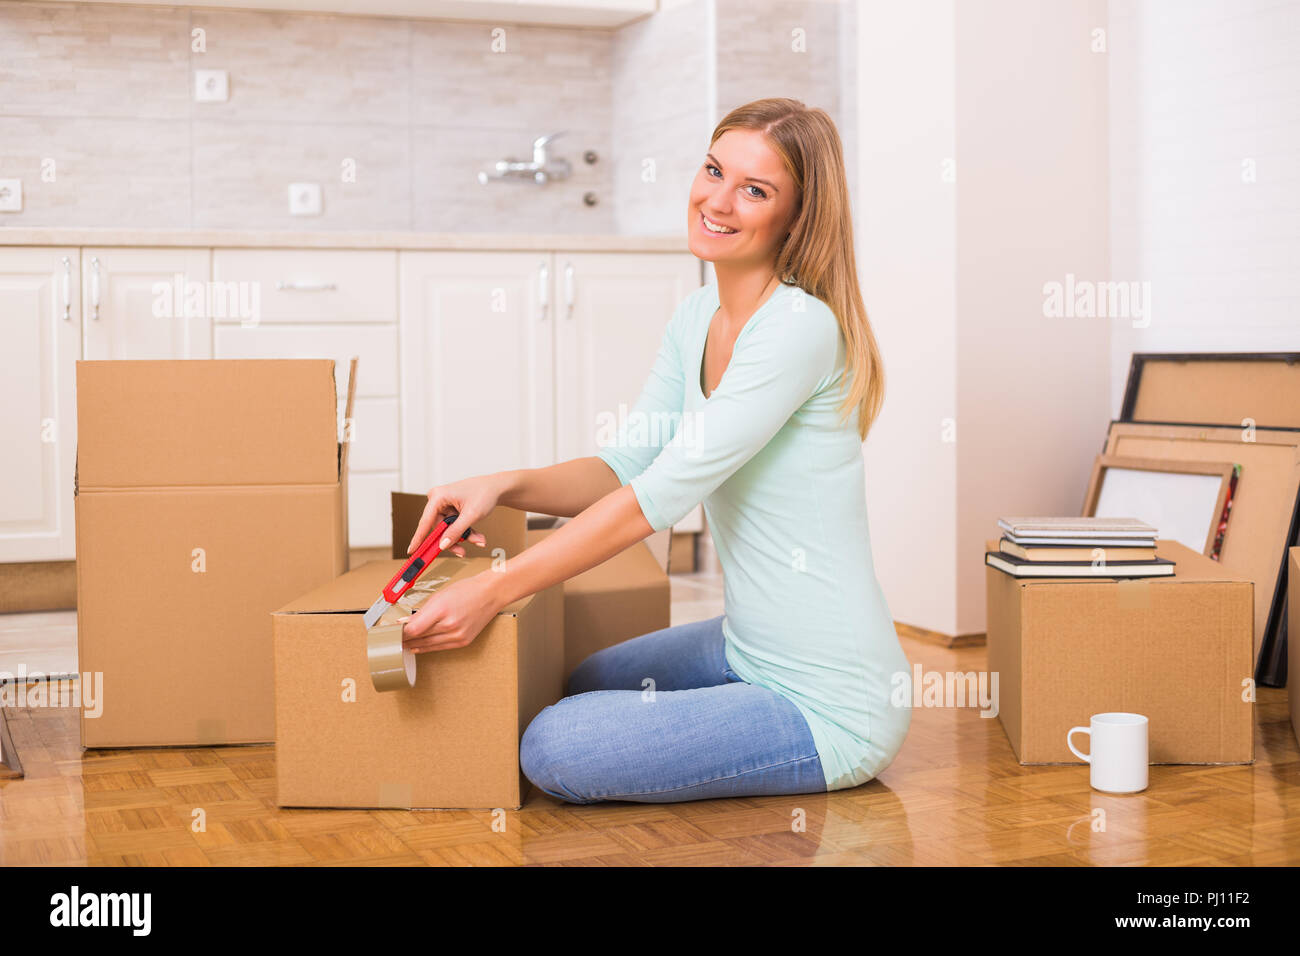 Beautiful woman moving into new home. Stock Photo